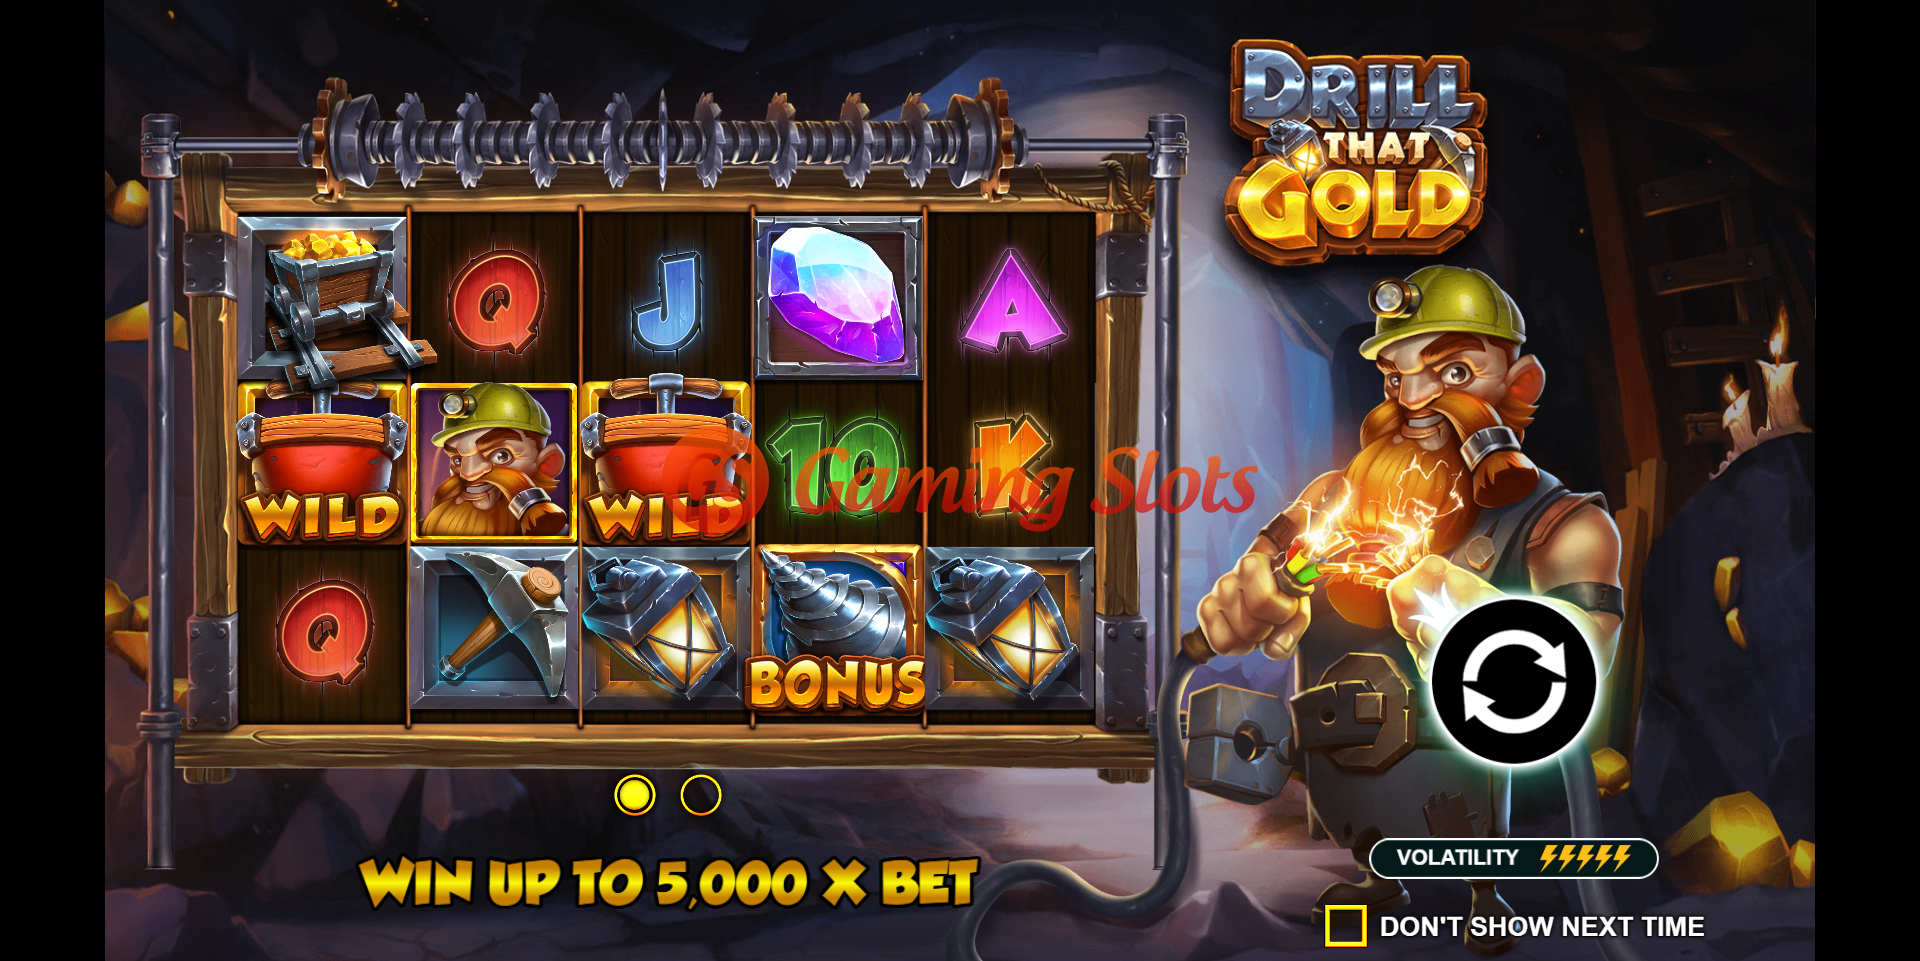 Game Intro for Drill That Gold slot from Pragmatic Play